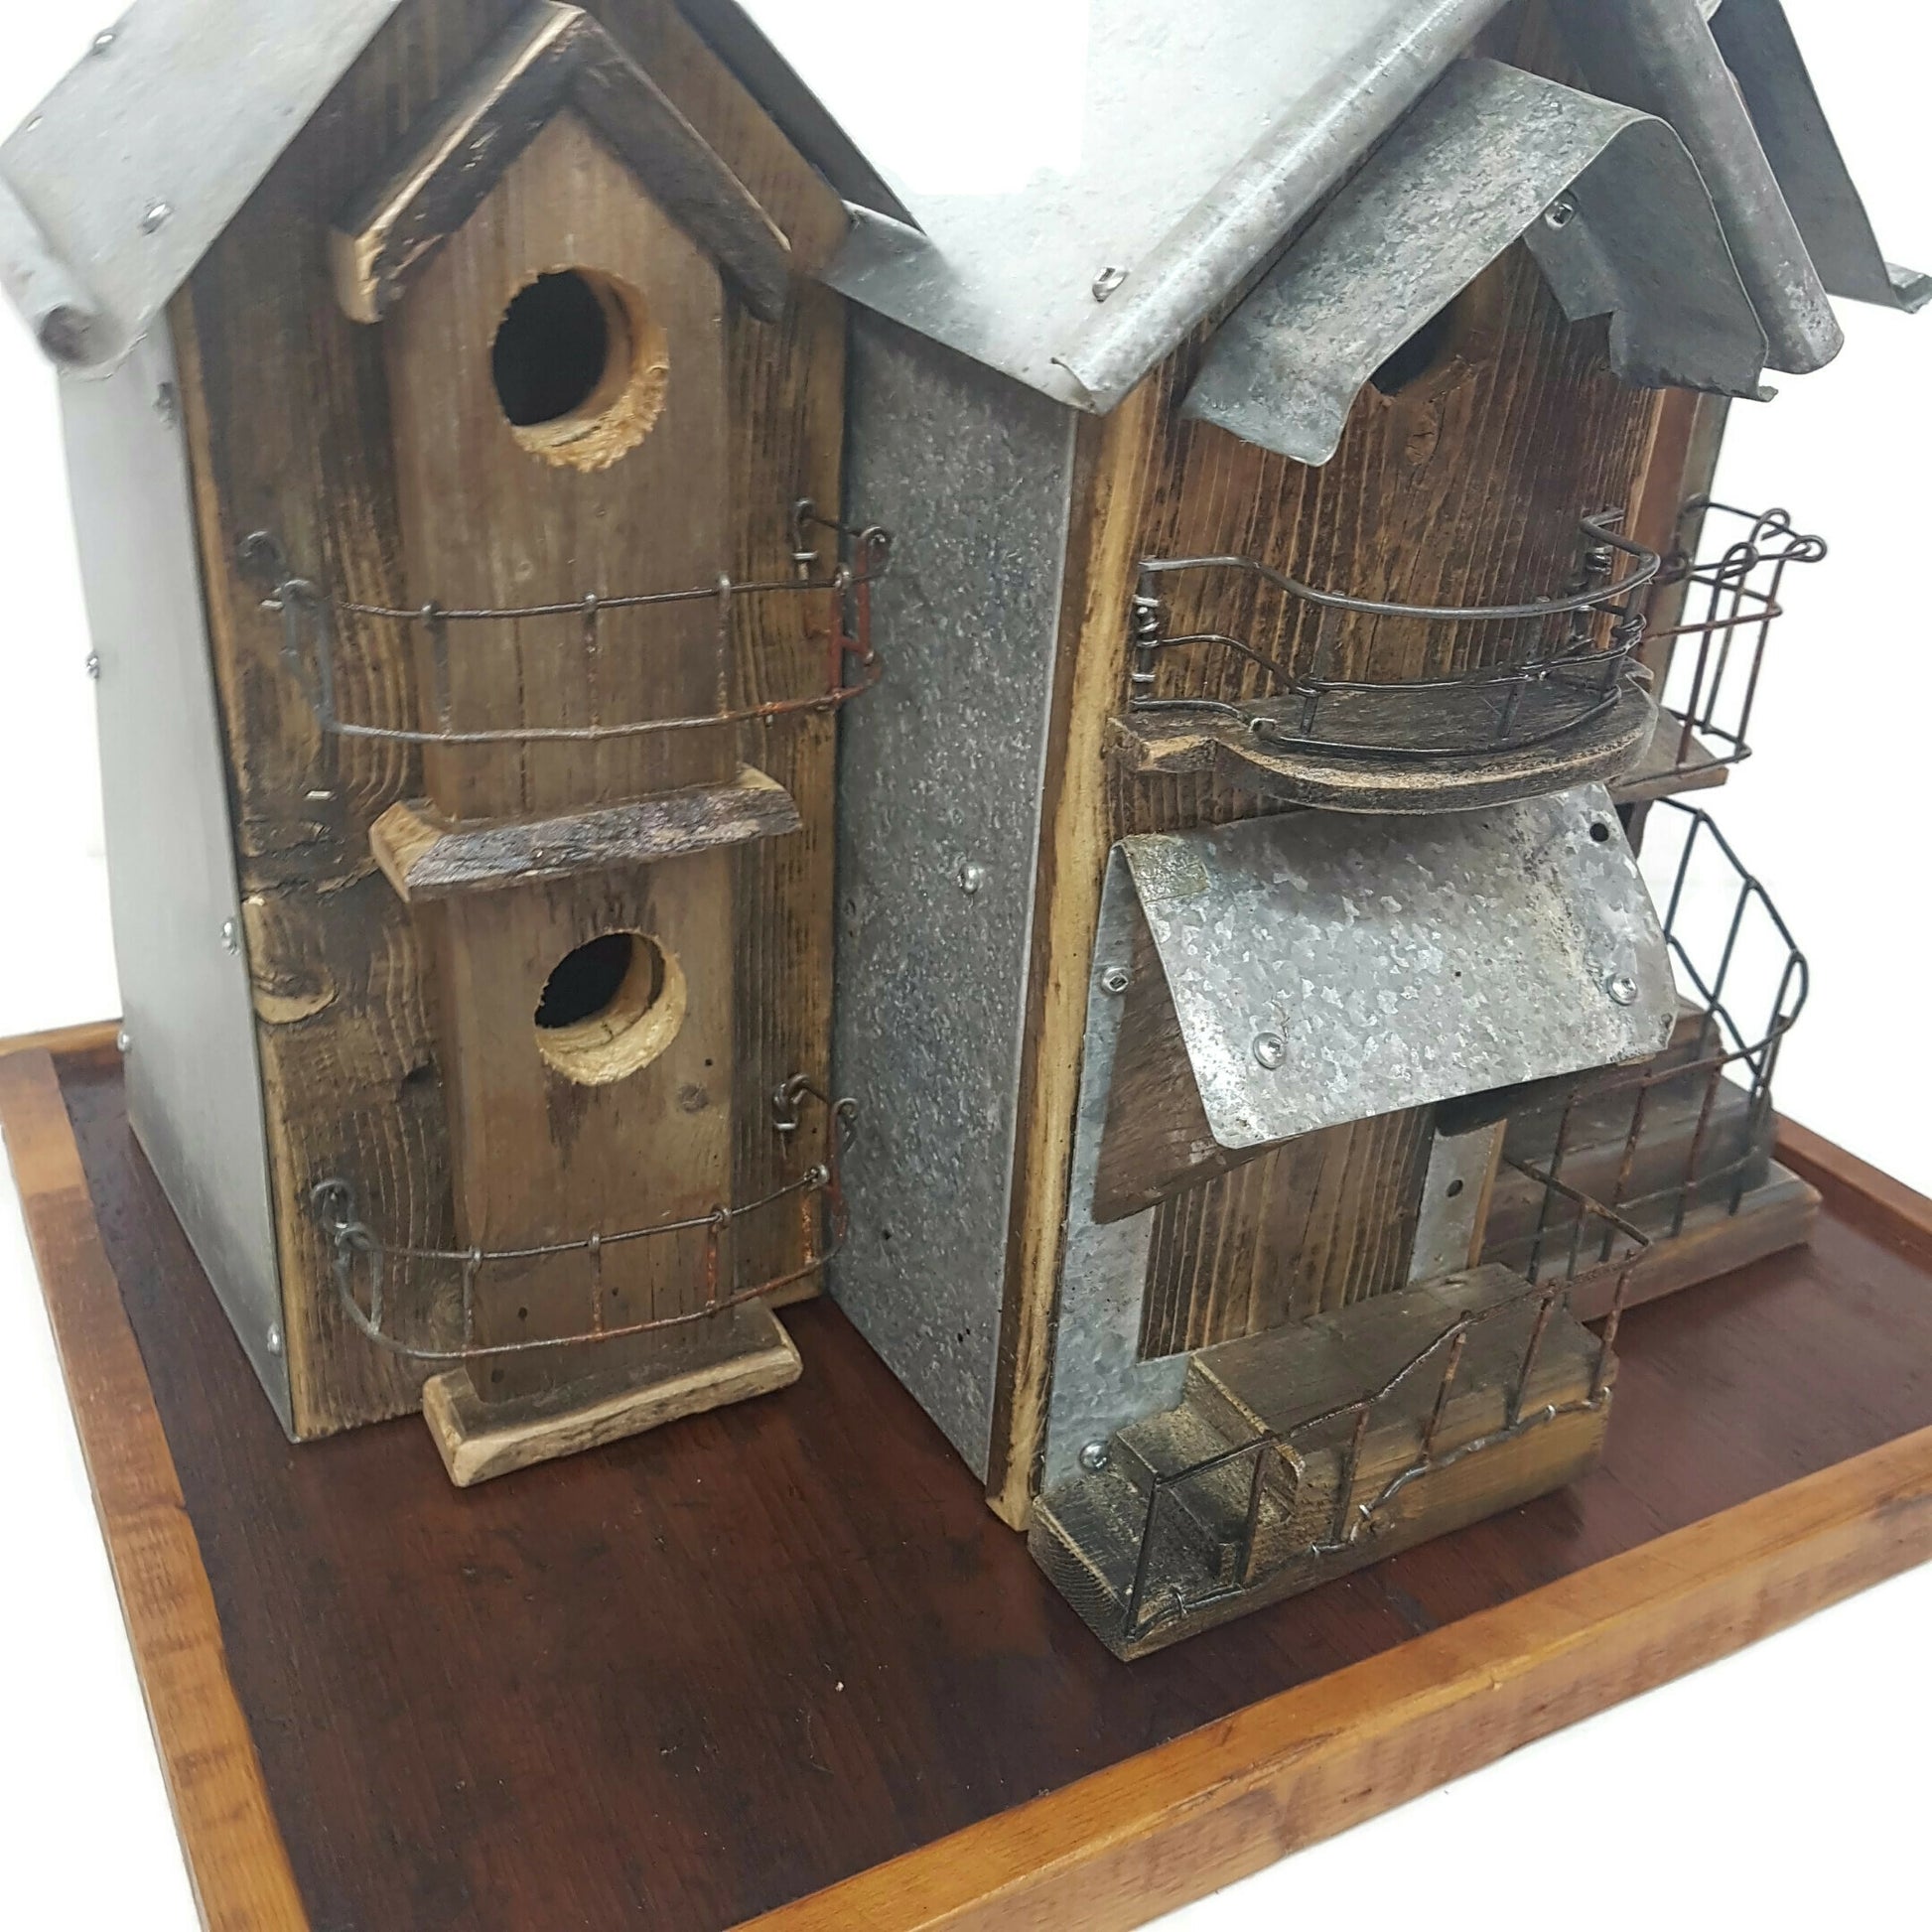 Rustic Bird House hand built with a Tin Roof - Wainfleet Trading Post